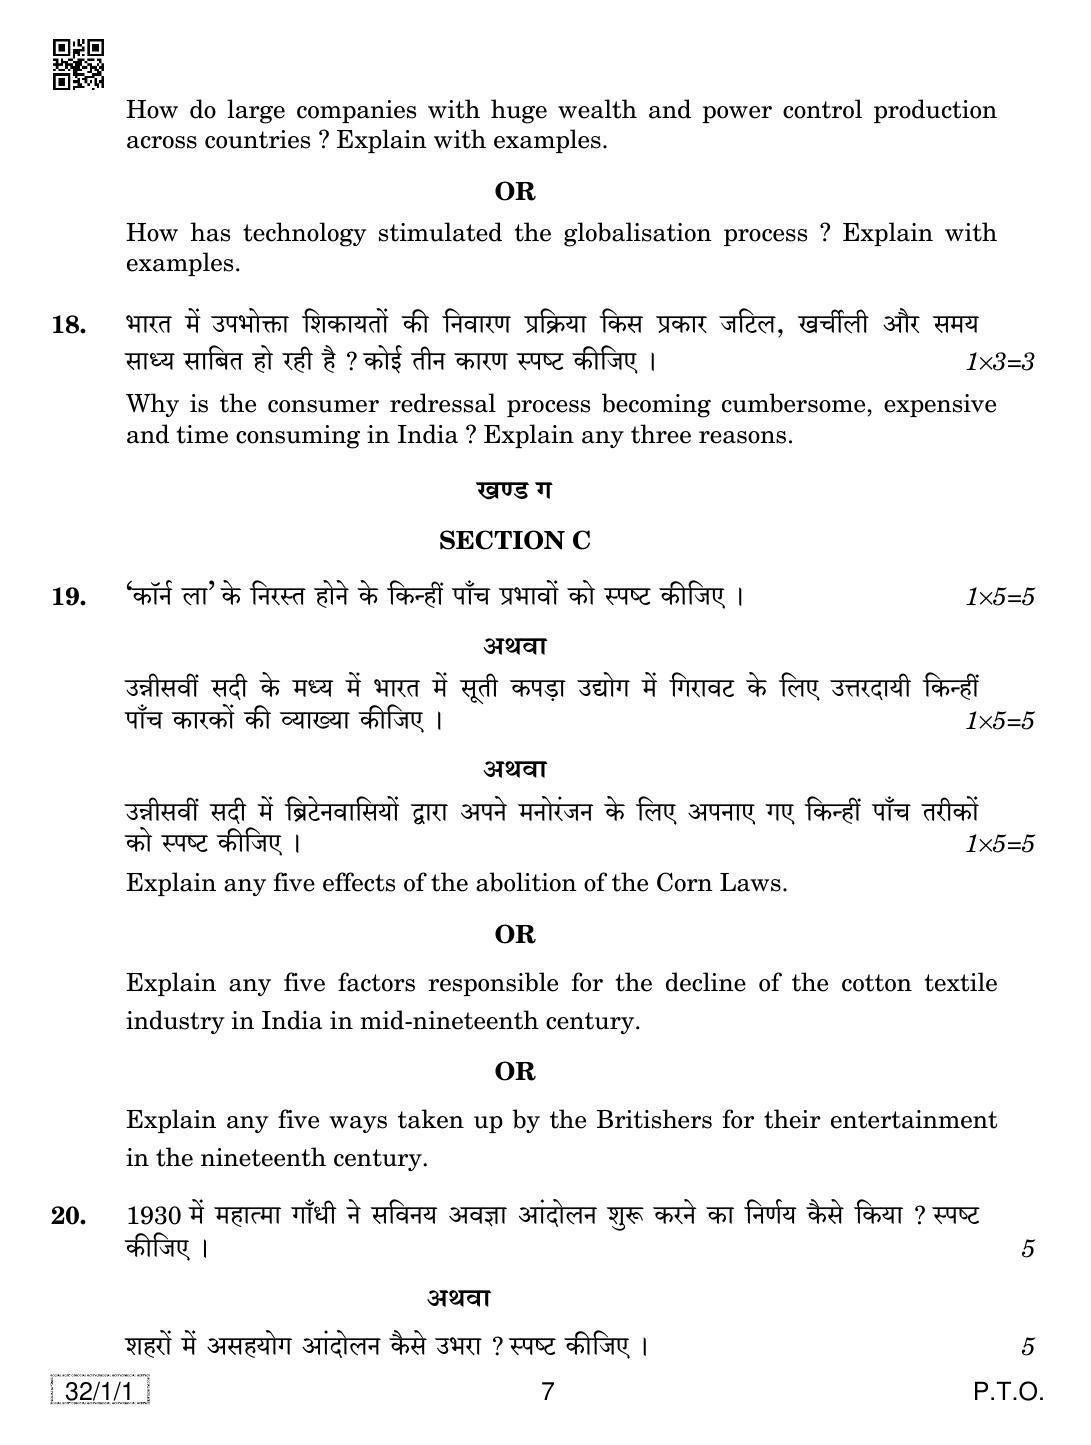 CBSE Class 10 32-1-1 SOCIAL SCIENCE 2019 Compartment Question Paper - Page 7